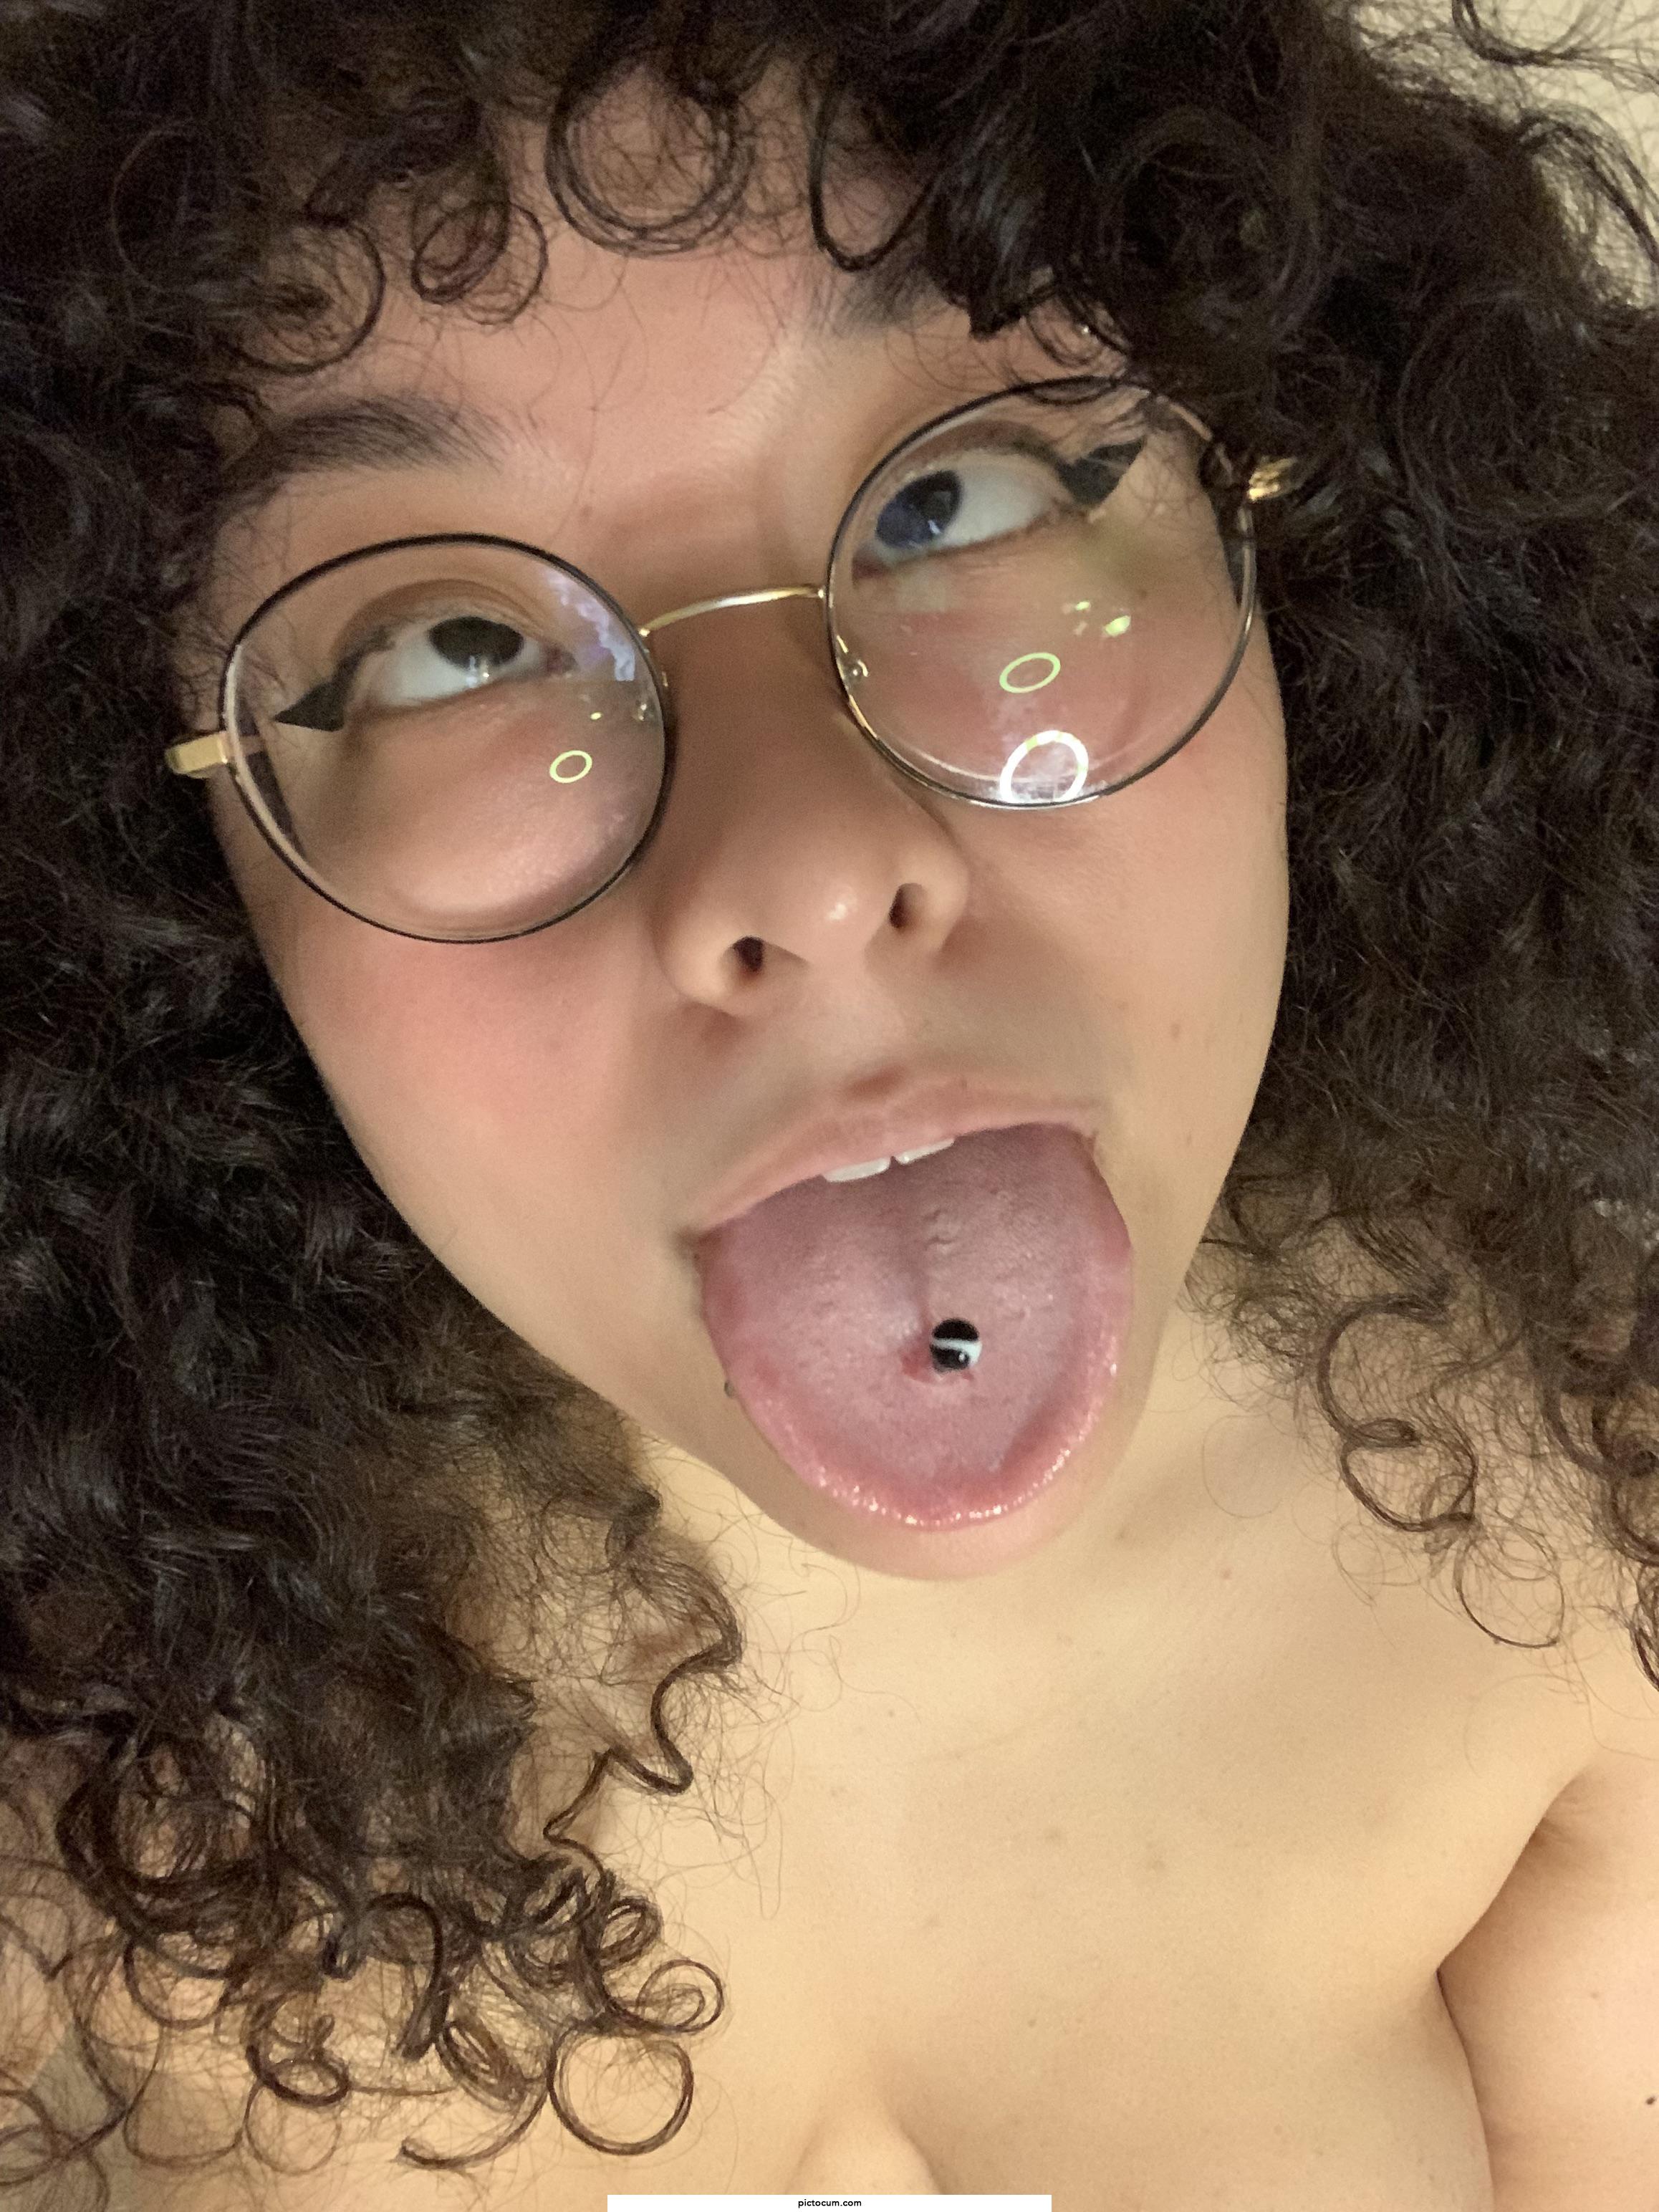 Haven’t had cum in my mouth in a while can you help with that